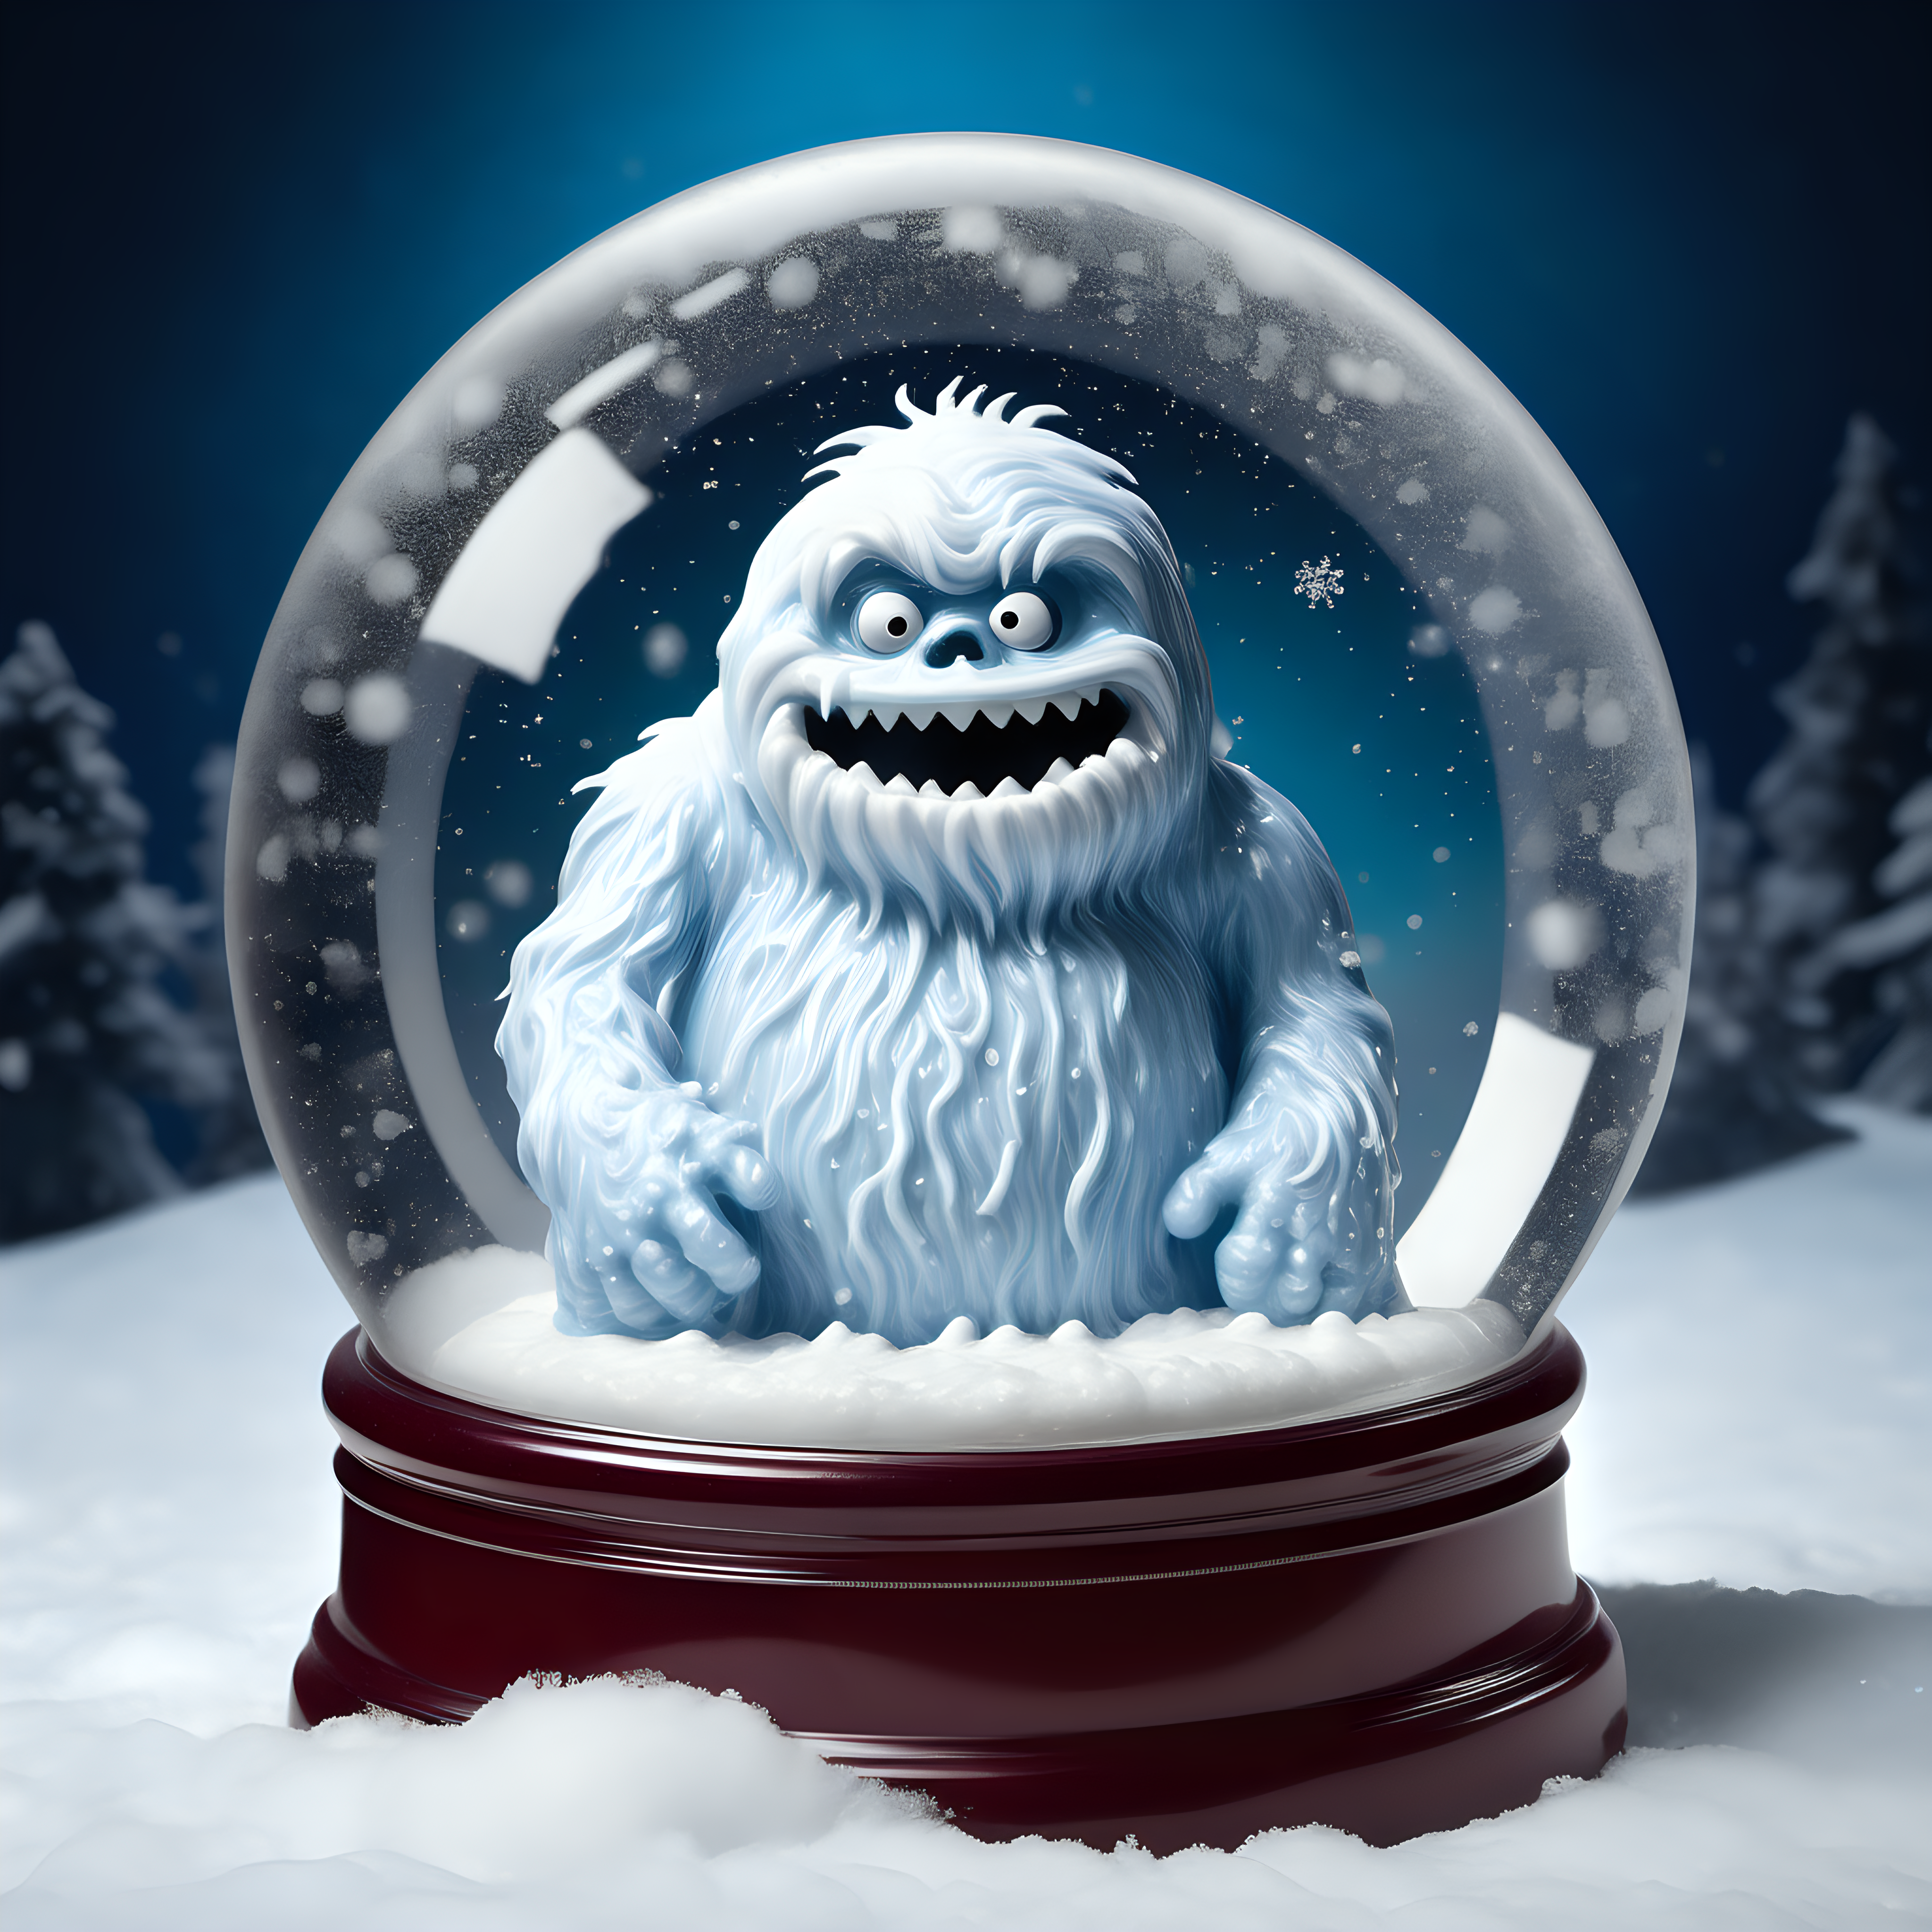 Abominable snowman in a snow globe